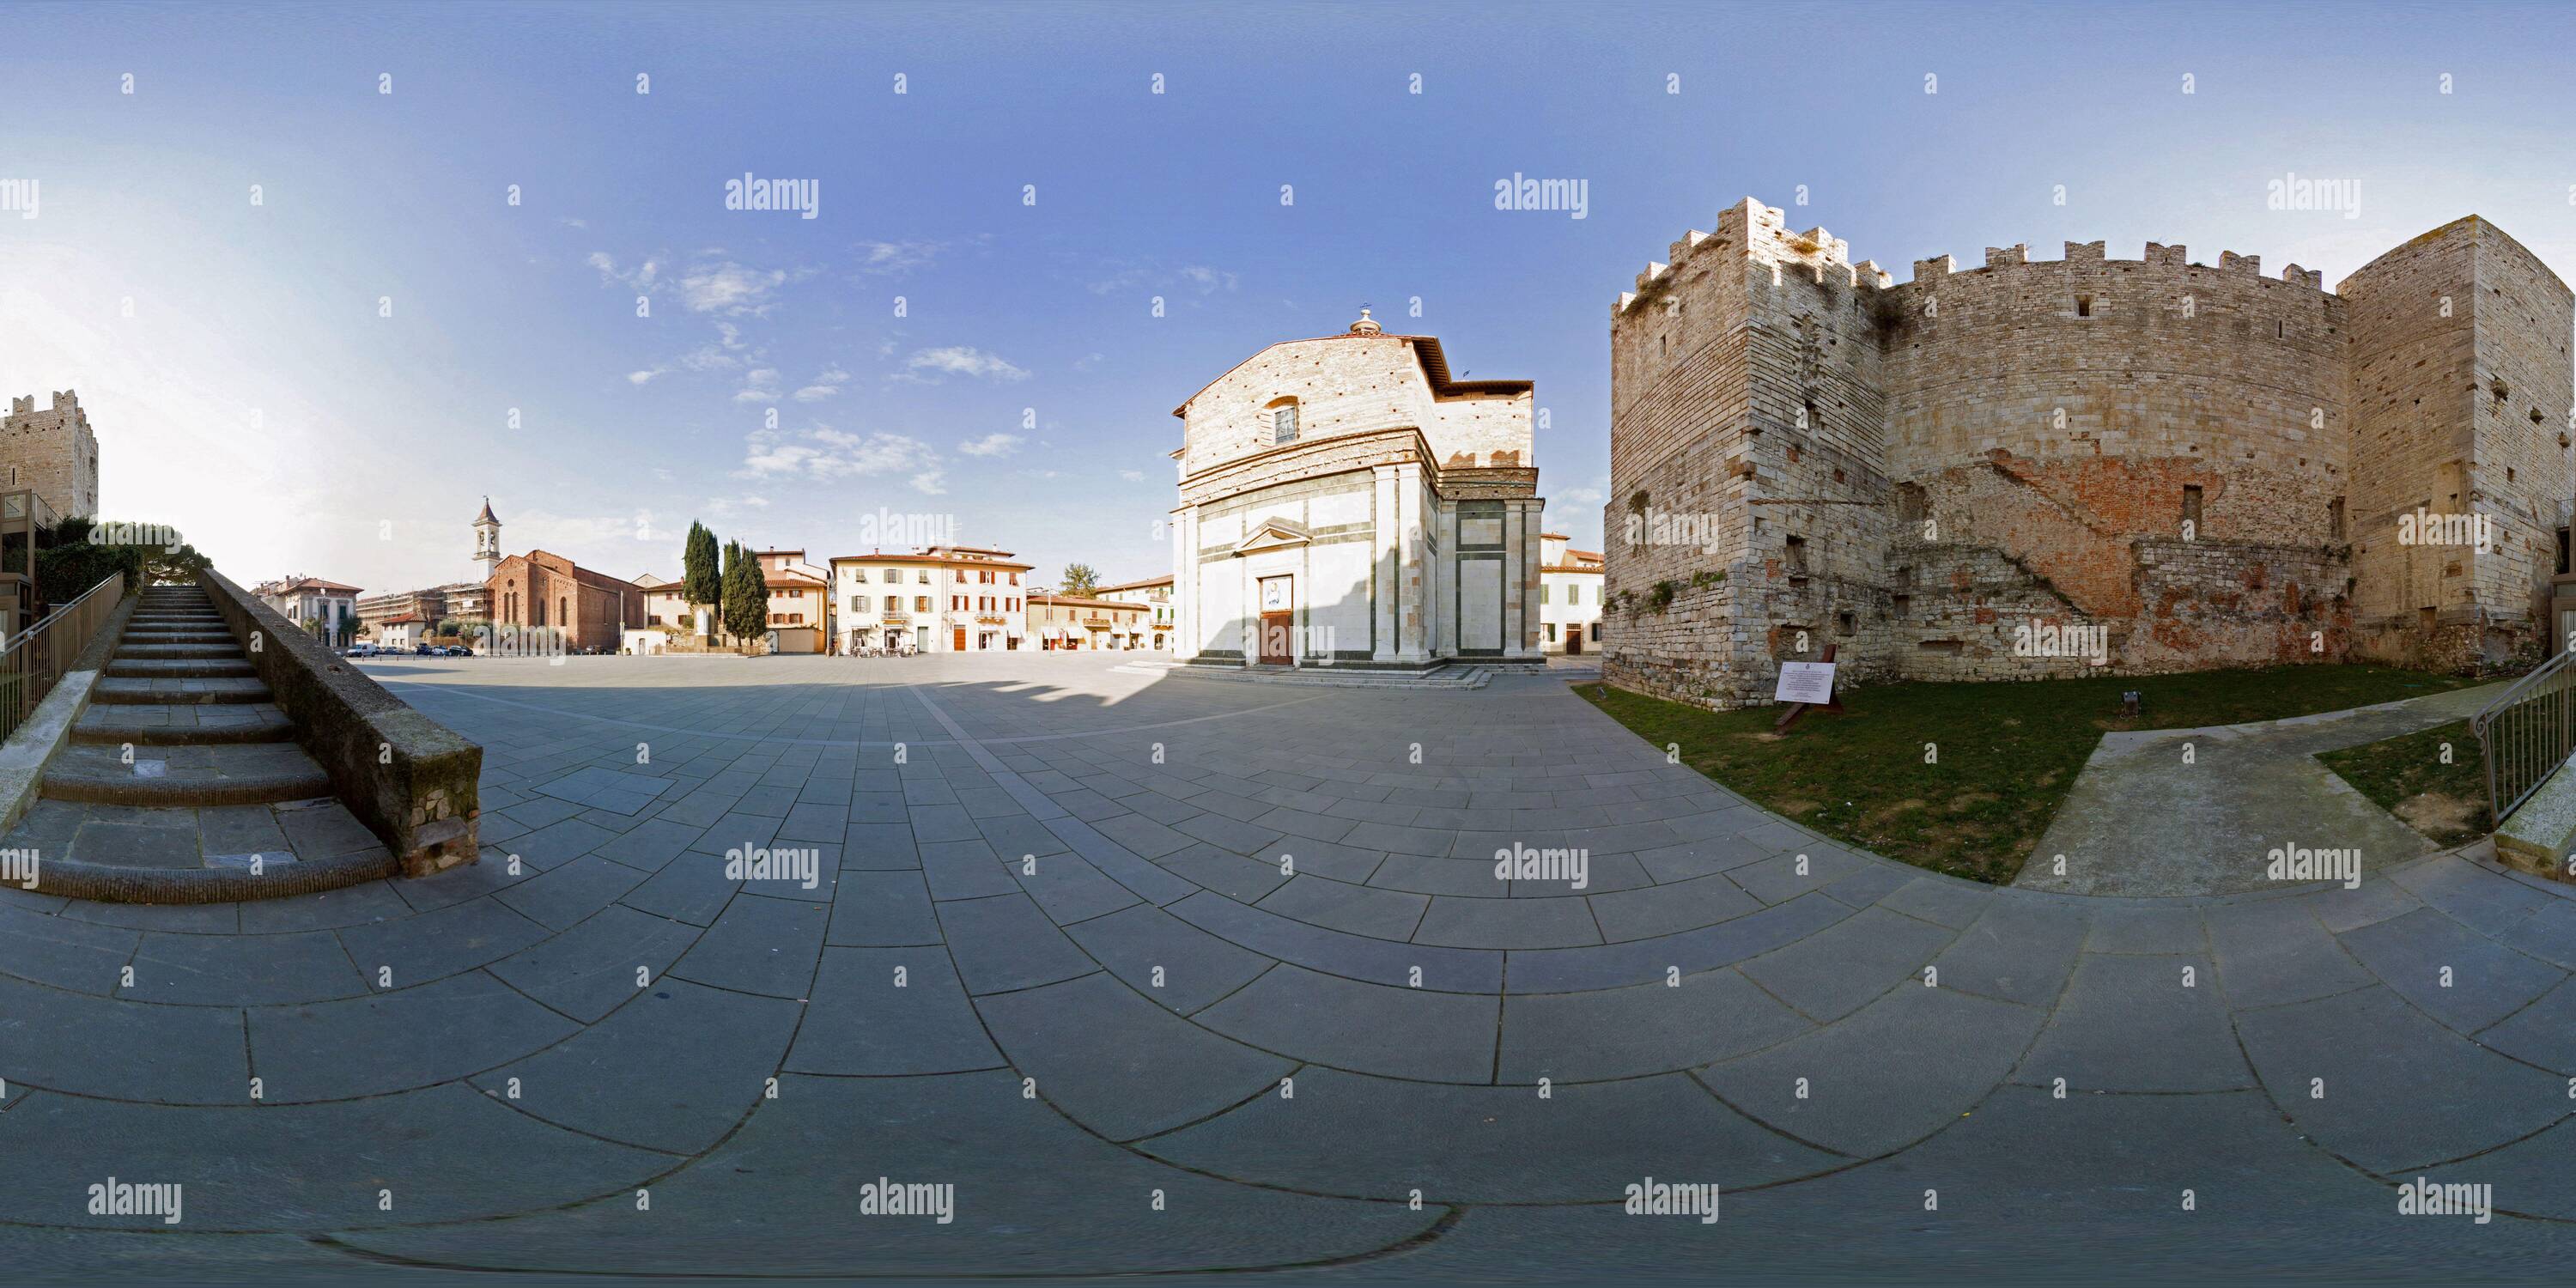 360 degree panoramic view of Piazza delle Carceri in Prato with the Medieval Castle of Frederick II, Holy Roman Emperor and the church S.Maria delle Carceri.